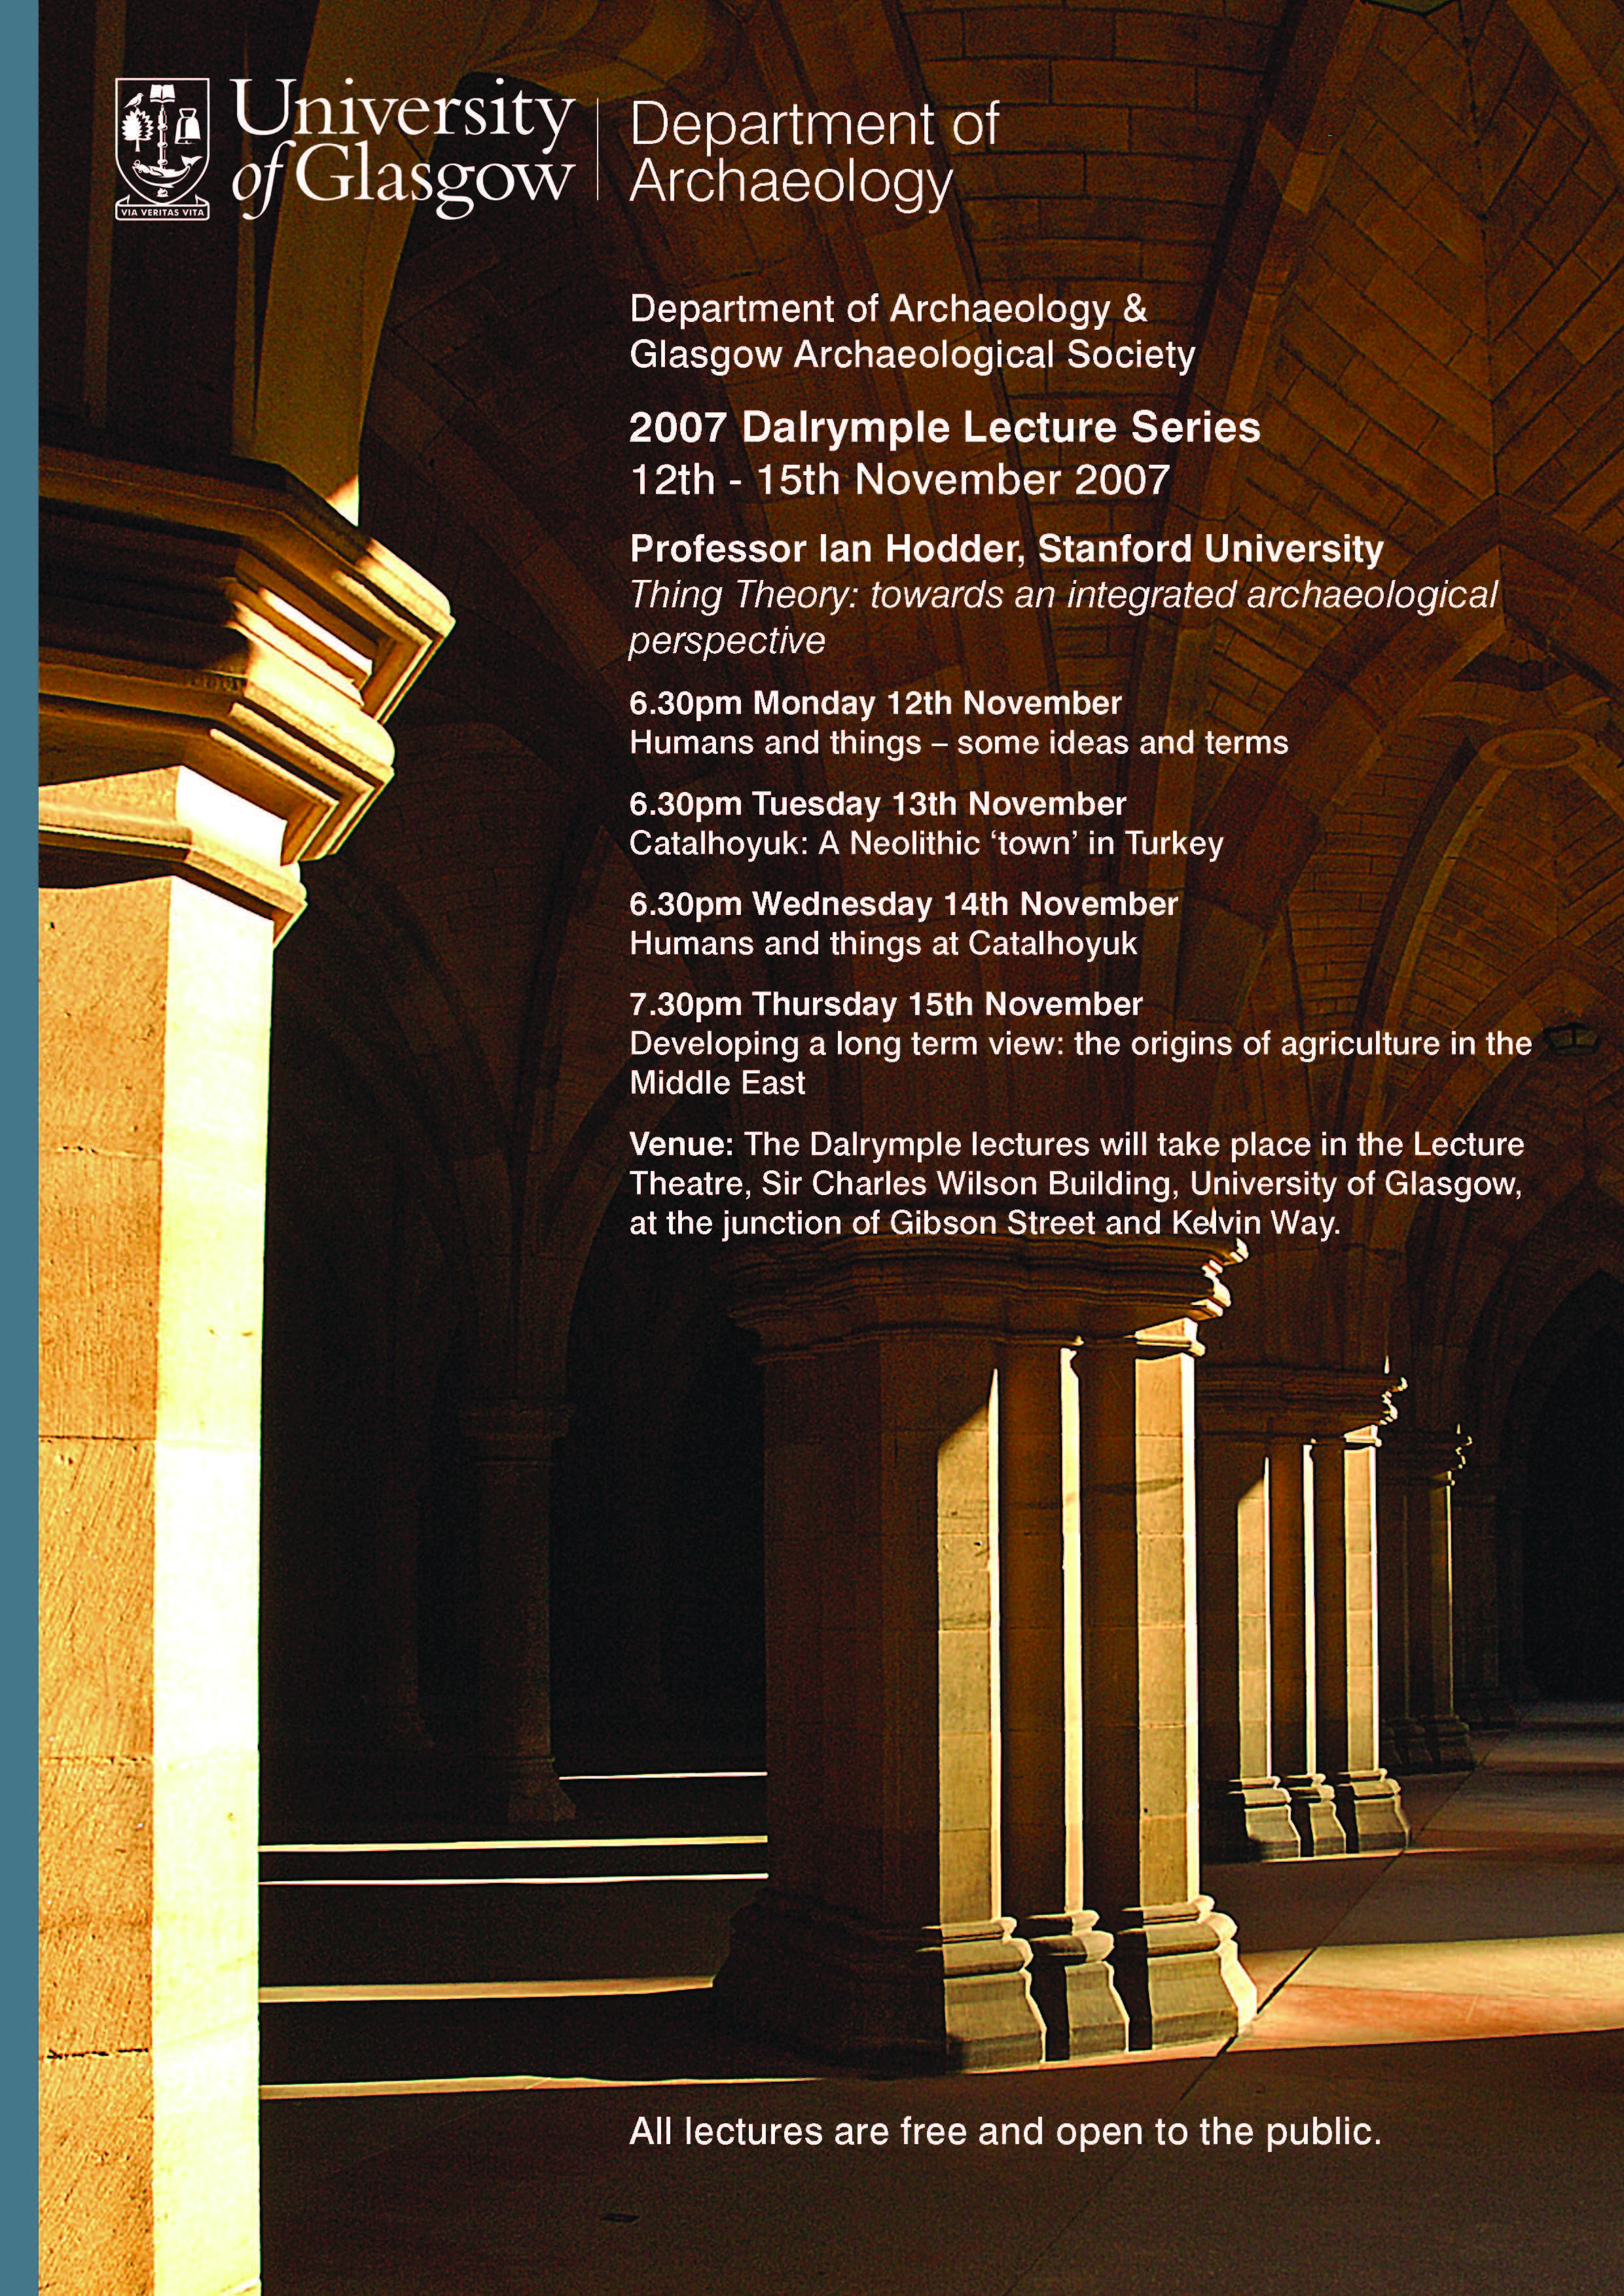 Dalrymple Lectures 2007 (jpg)